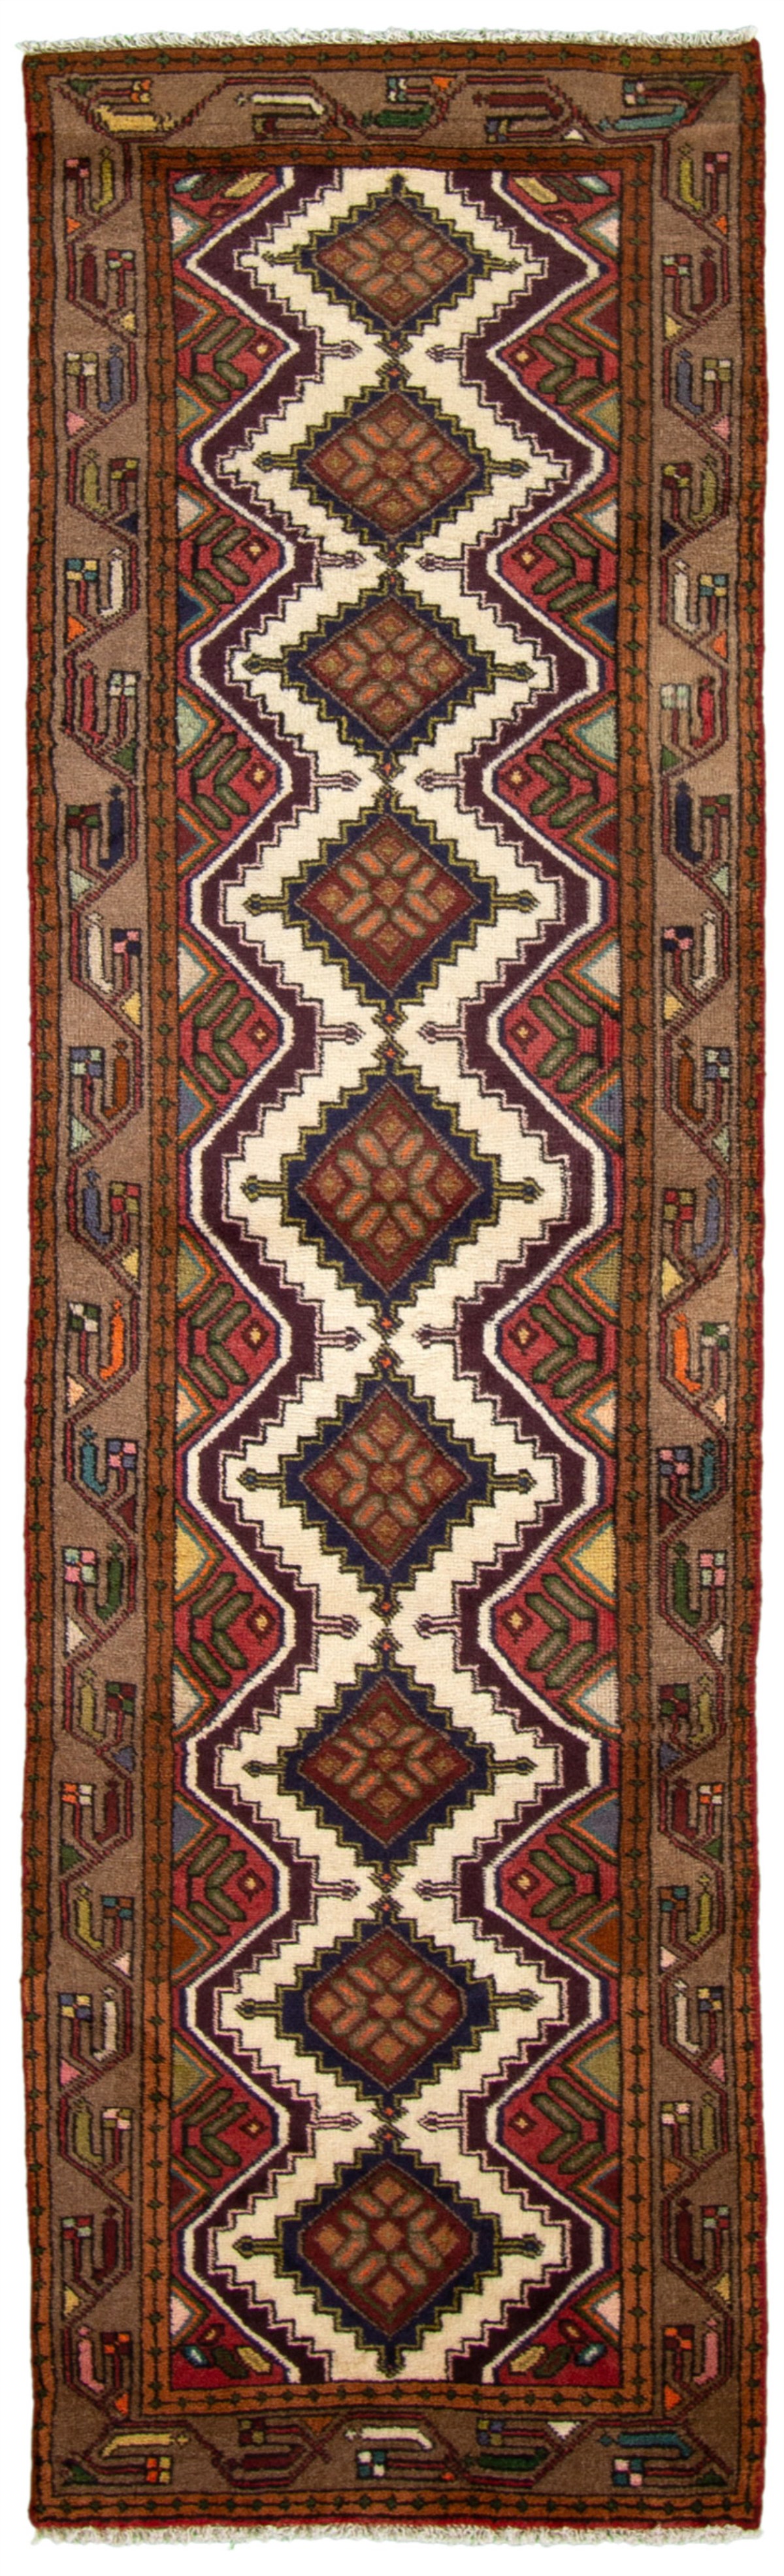 Hand-knotted Koliai Brown, Cream Wool Rug 2'6" x 8'11" Size: 2'6" x 8'11"  